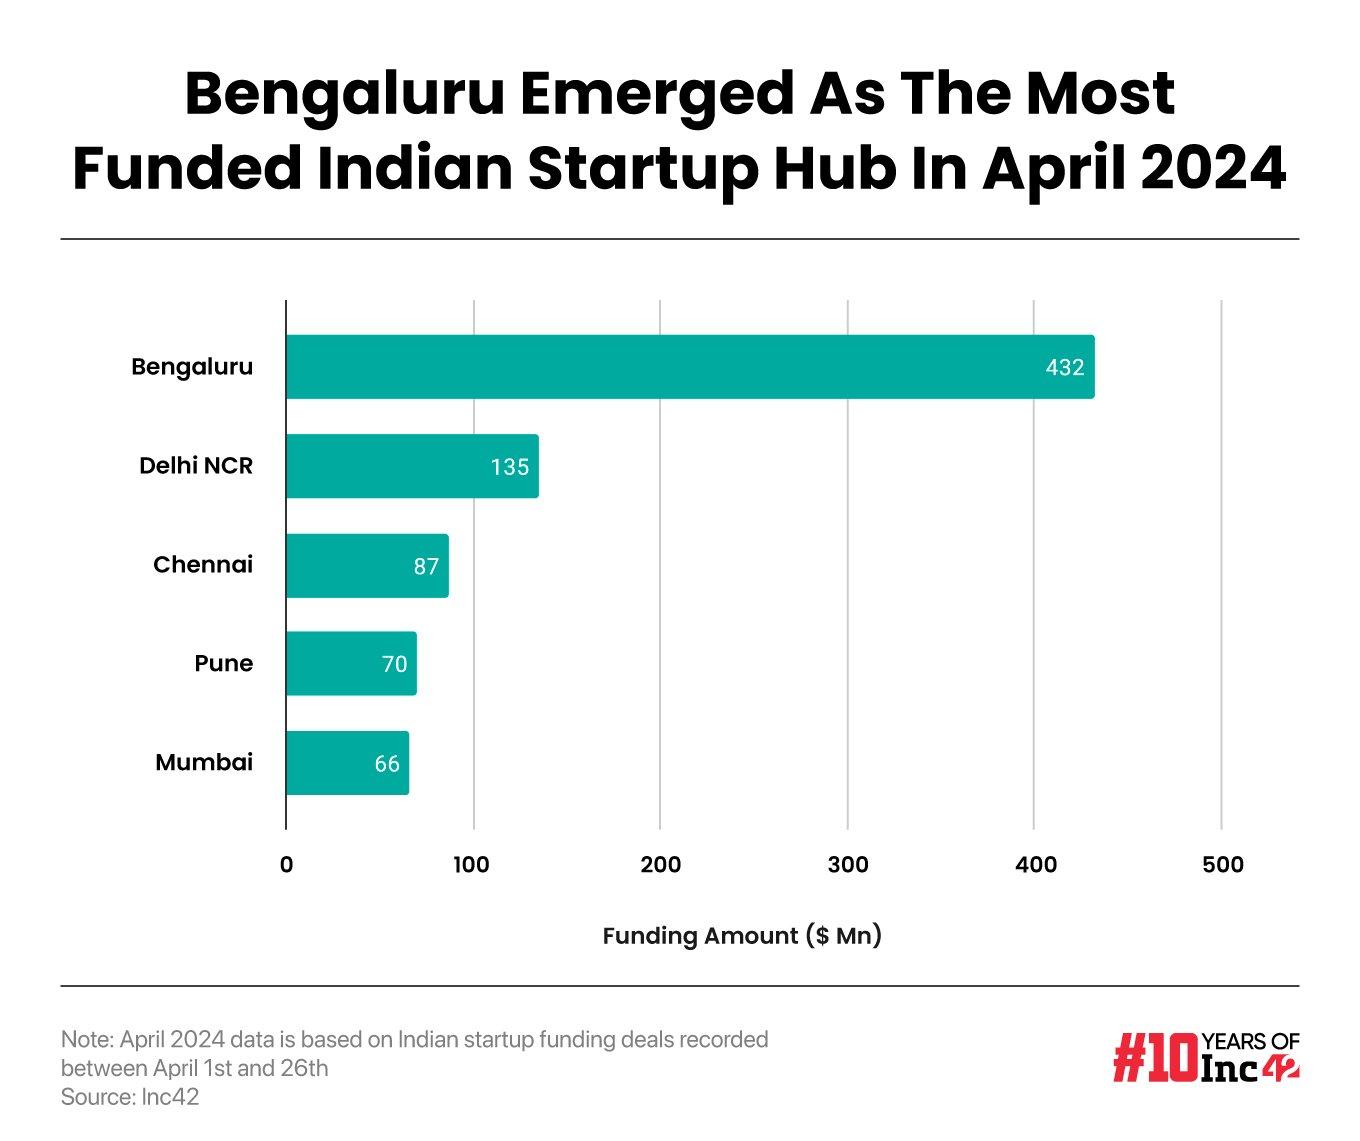 Seed and growth stage startups registered a YoY increase in funding in April after a marginal decline last month. Seed stage startups netted $178 Mn across 46 deals last month, a 286% increase from $46 Mn raised a year ago across 25 deals.